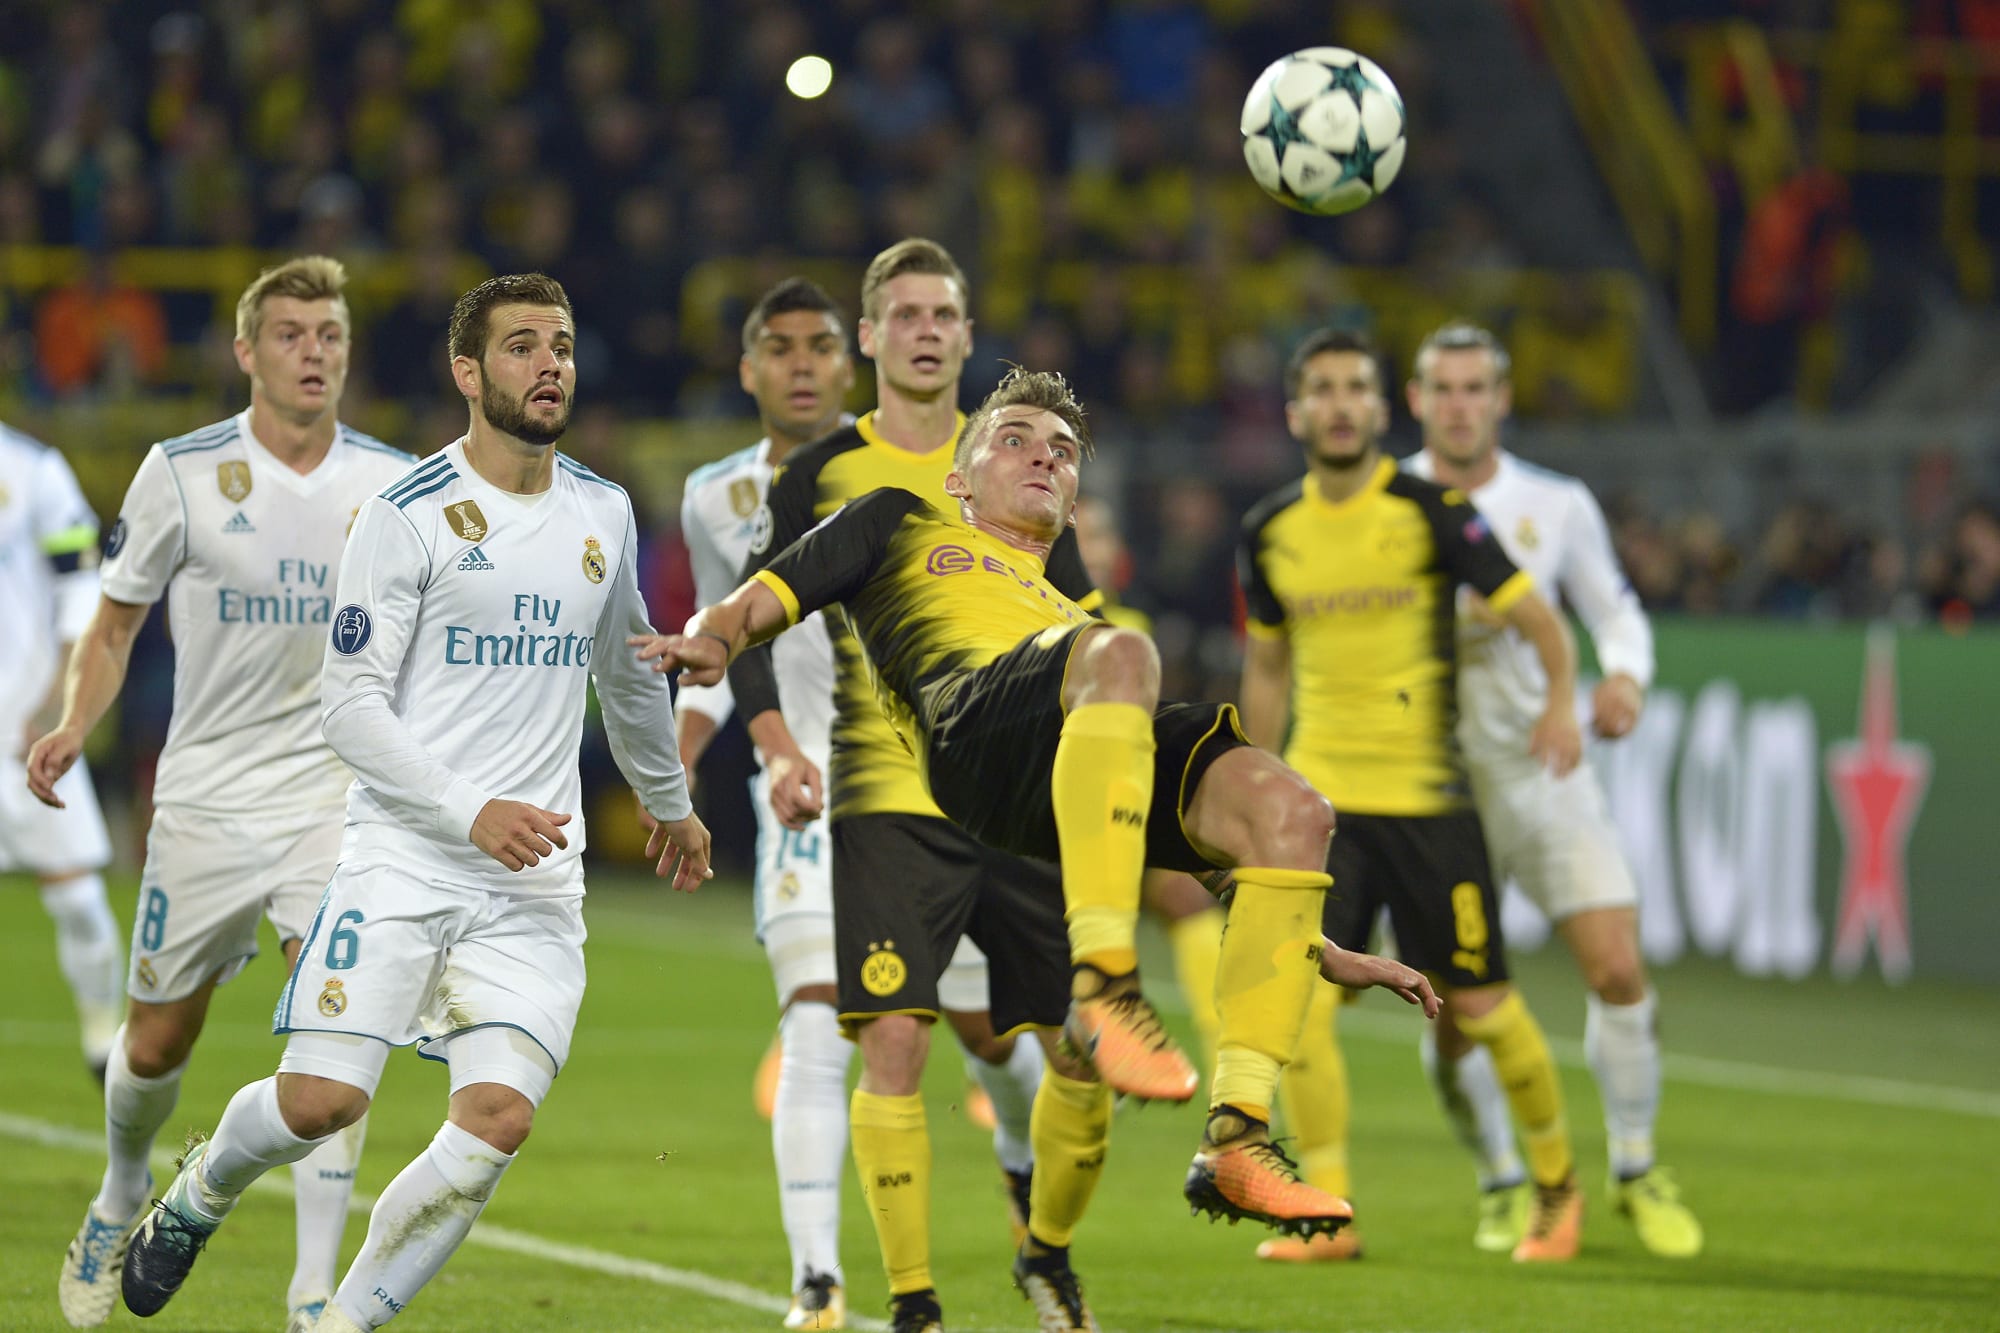  Real Madrid and Borussia Dortmund players compete for the ball during the 2017/18 Champions League Final at Wembley Stadium.